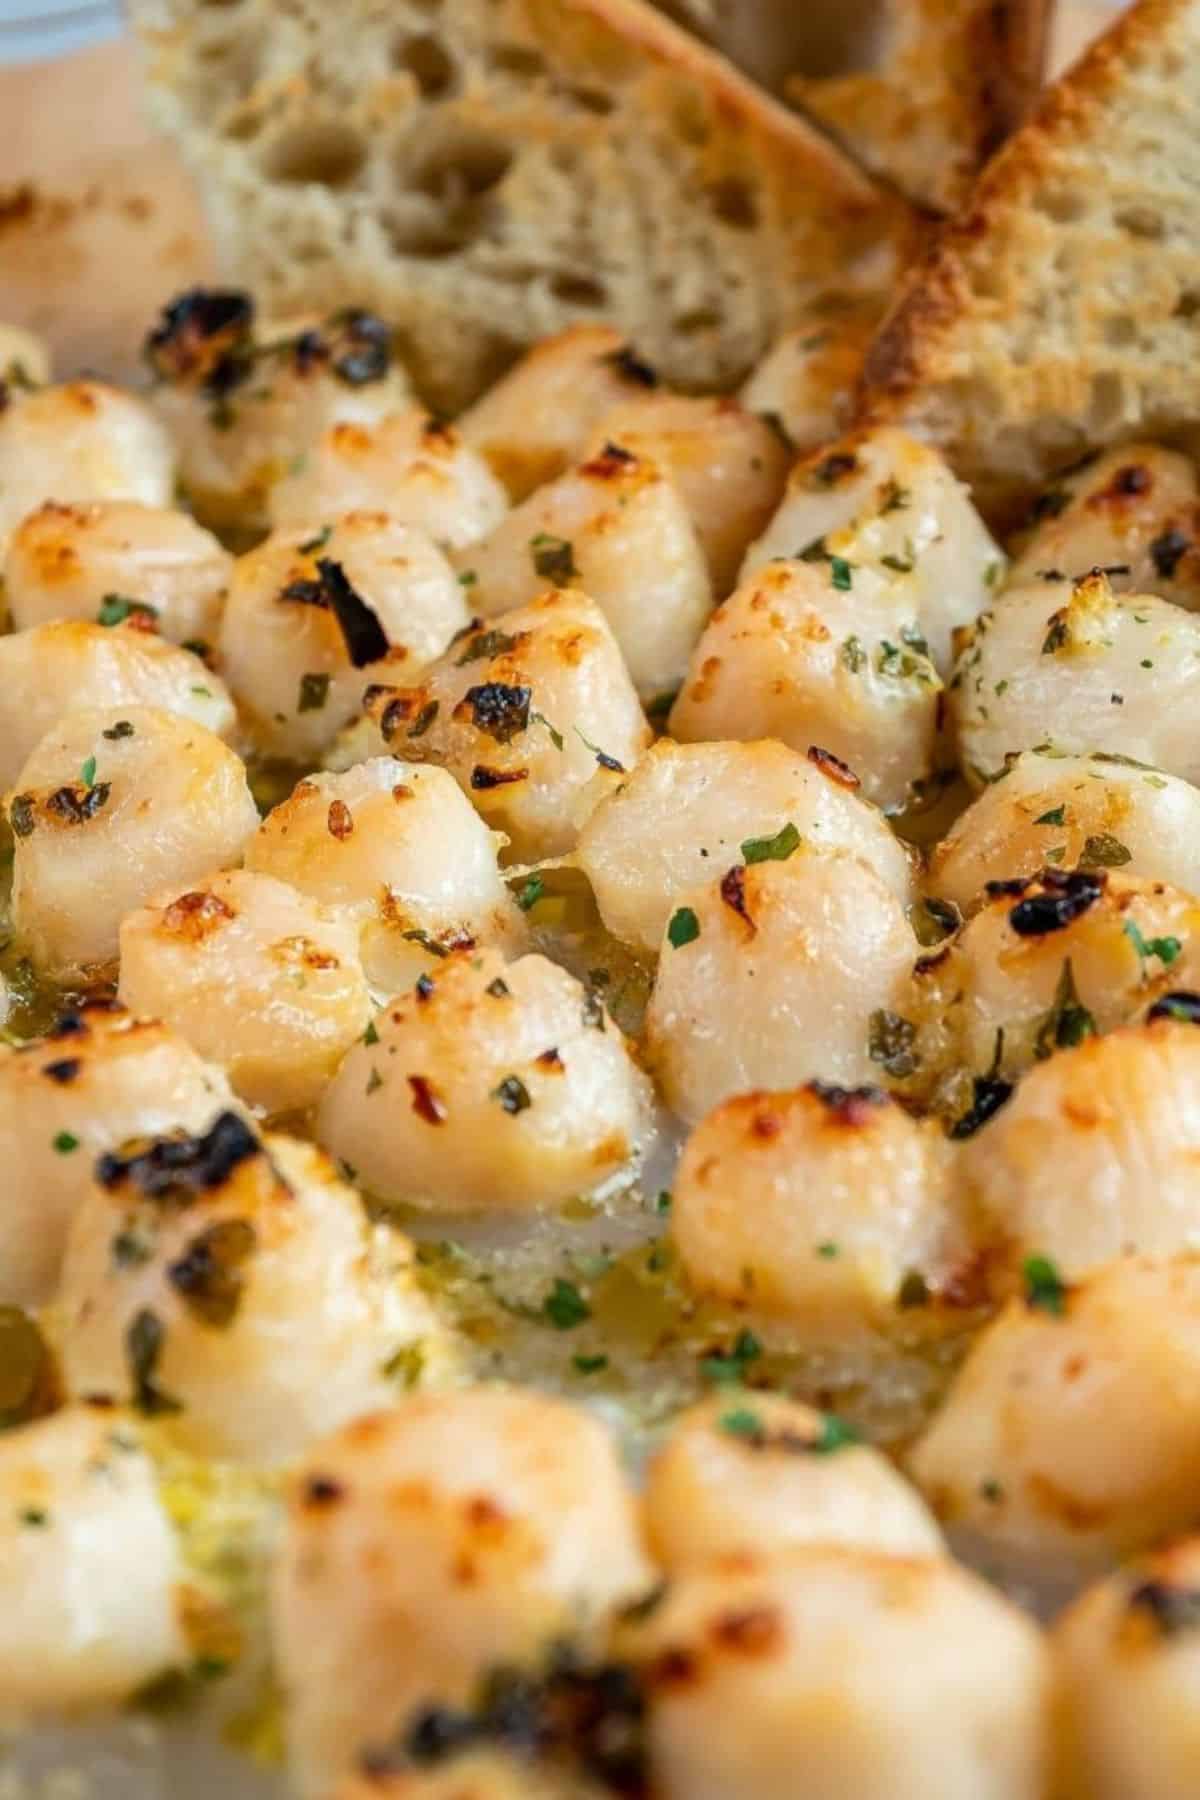 Juicy Broiled Bay Scallops in a bowl.